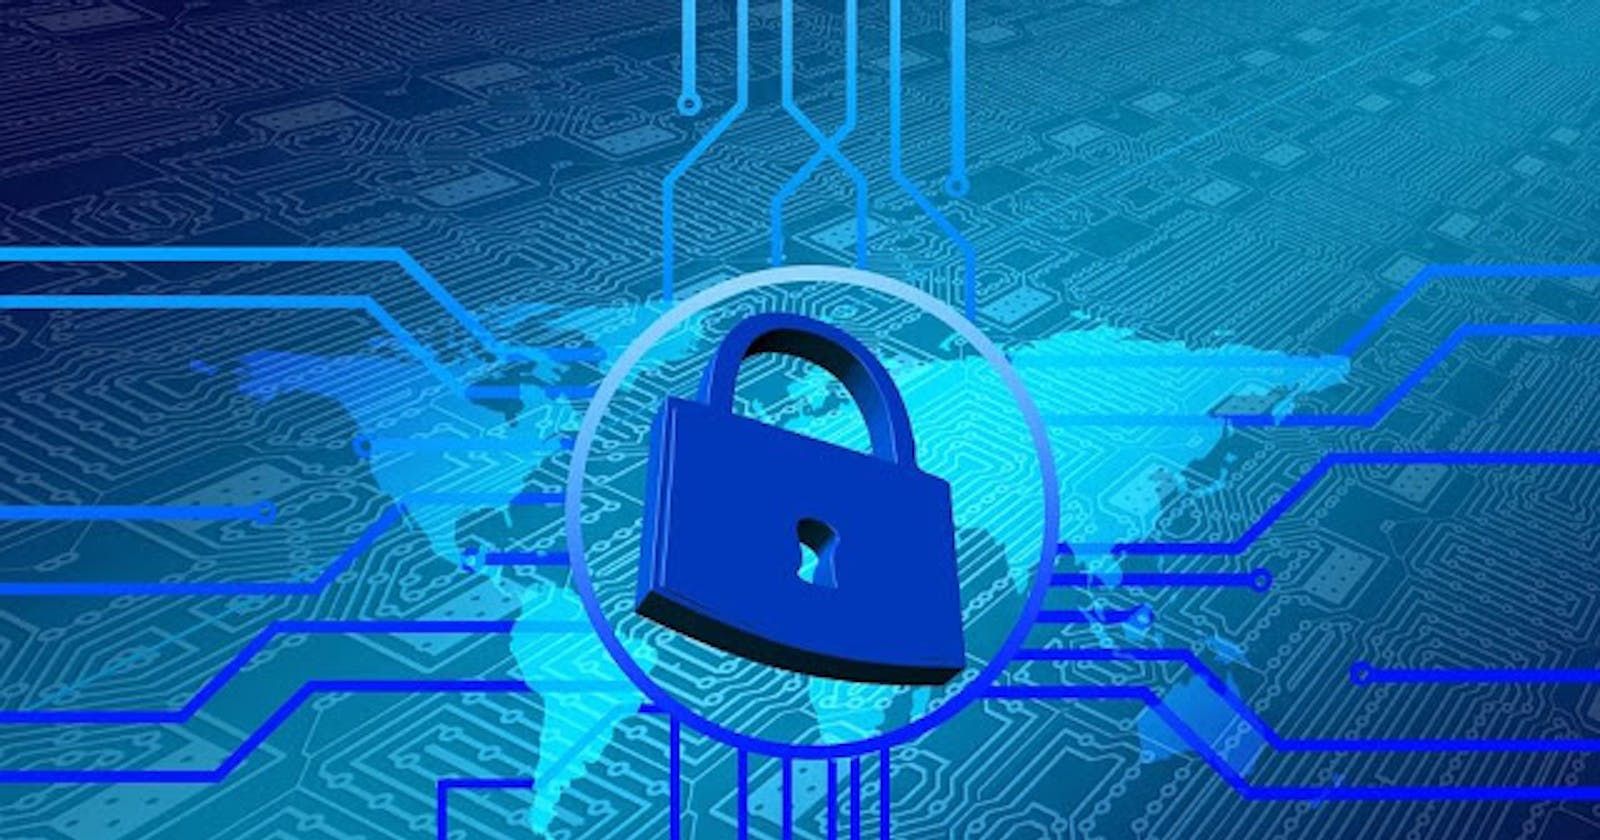 Web application security facts to consider for 2019